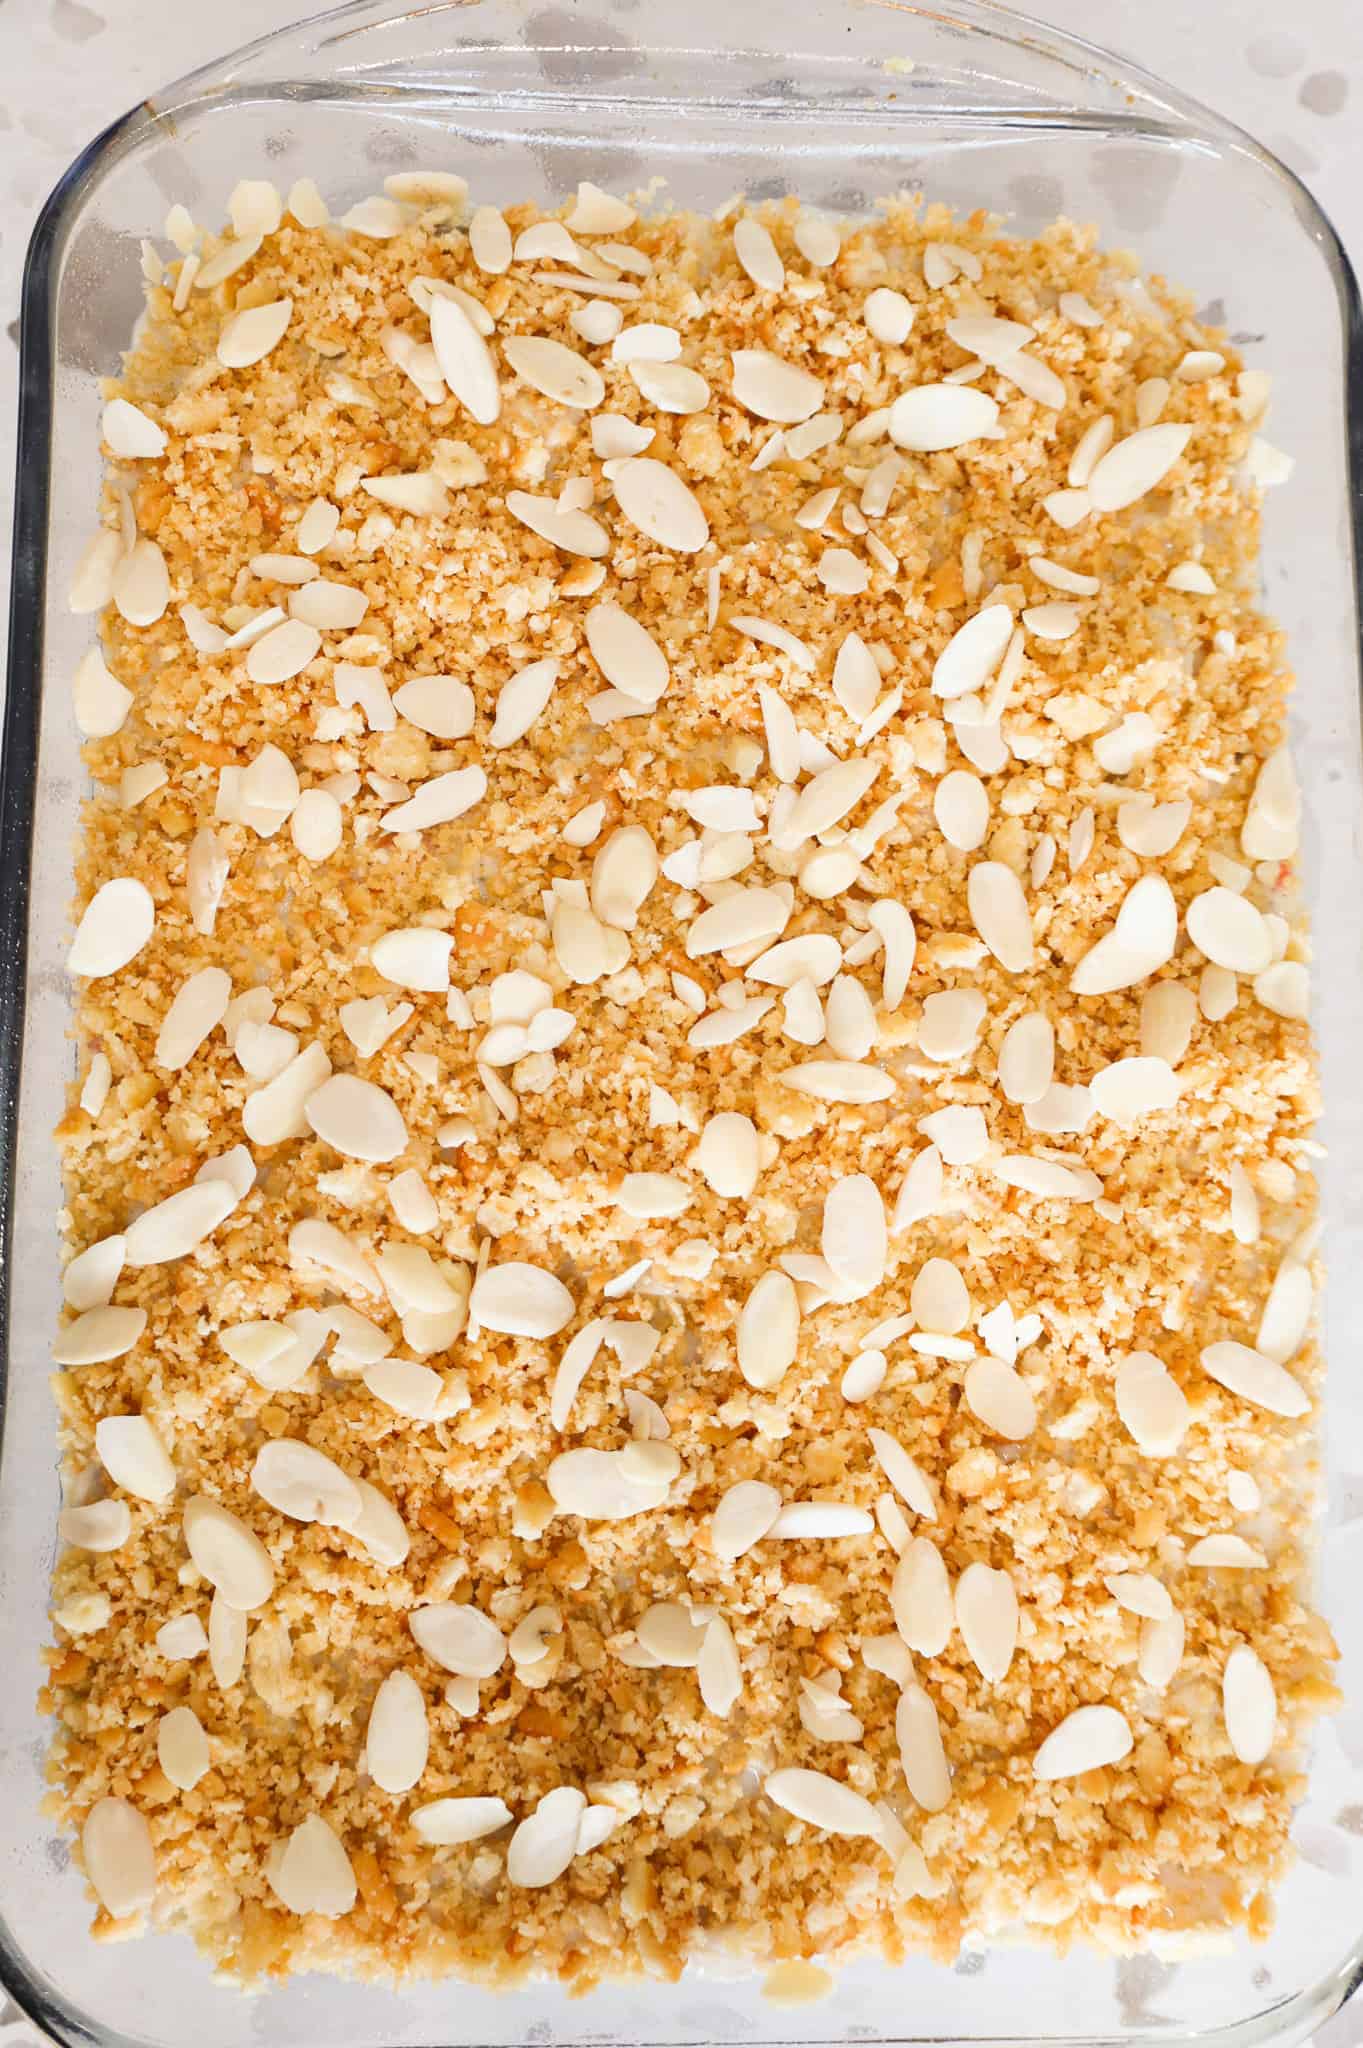 sliced almonds and Ritz cracker crumbs on top of chicken and rice casserole